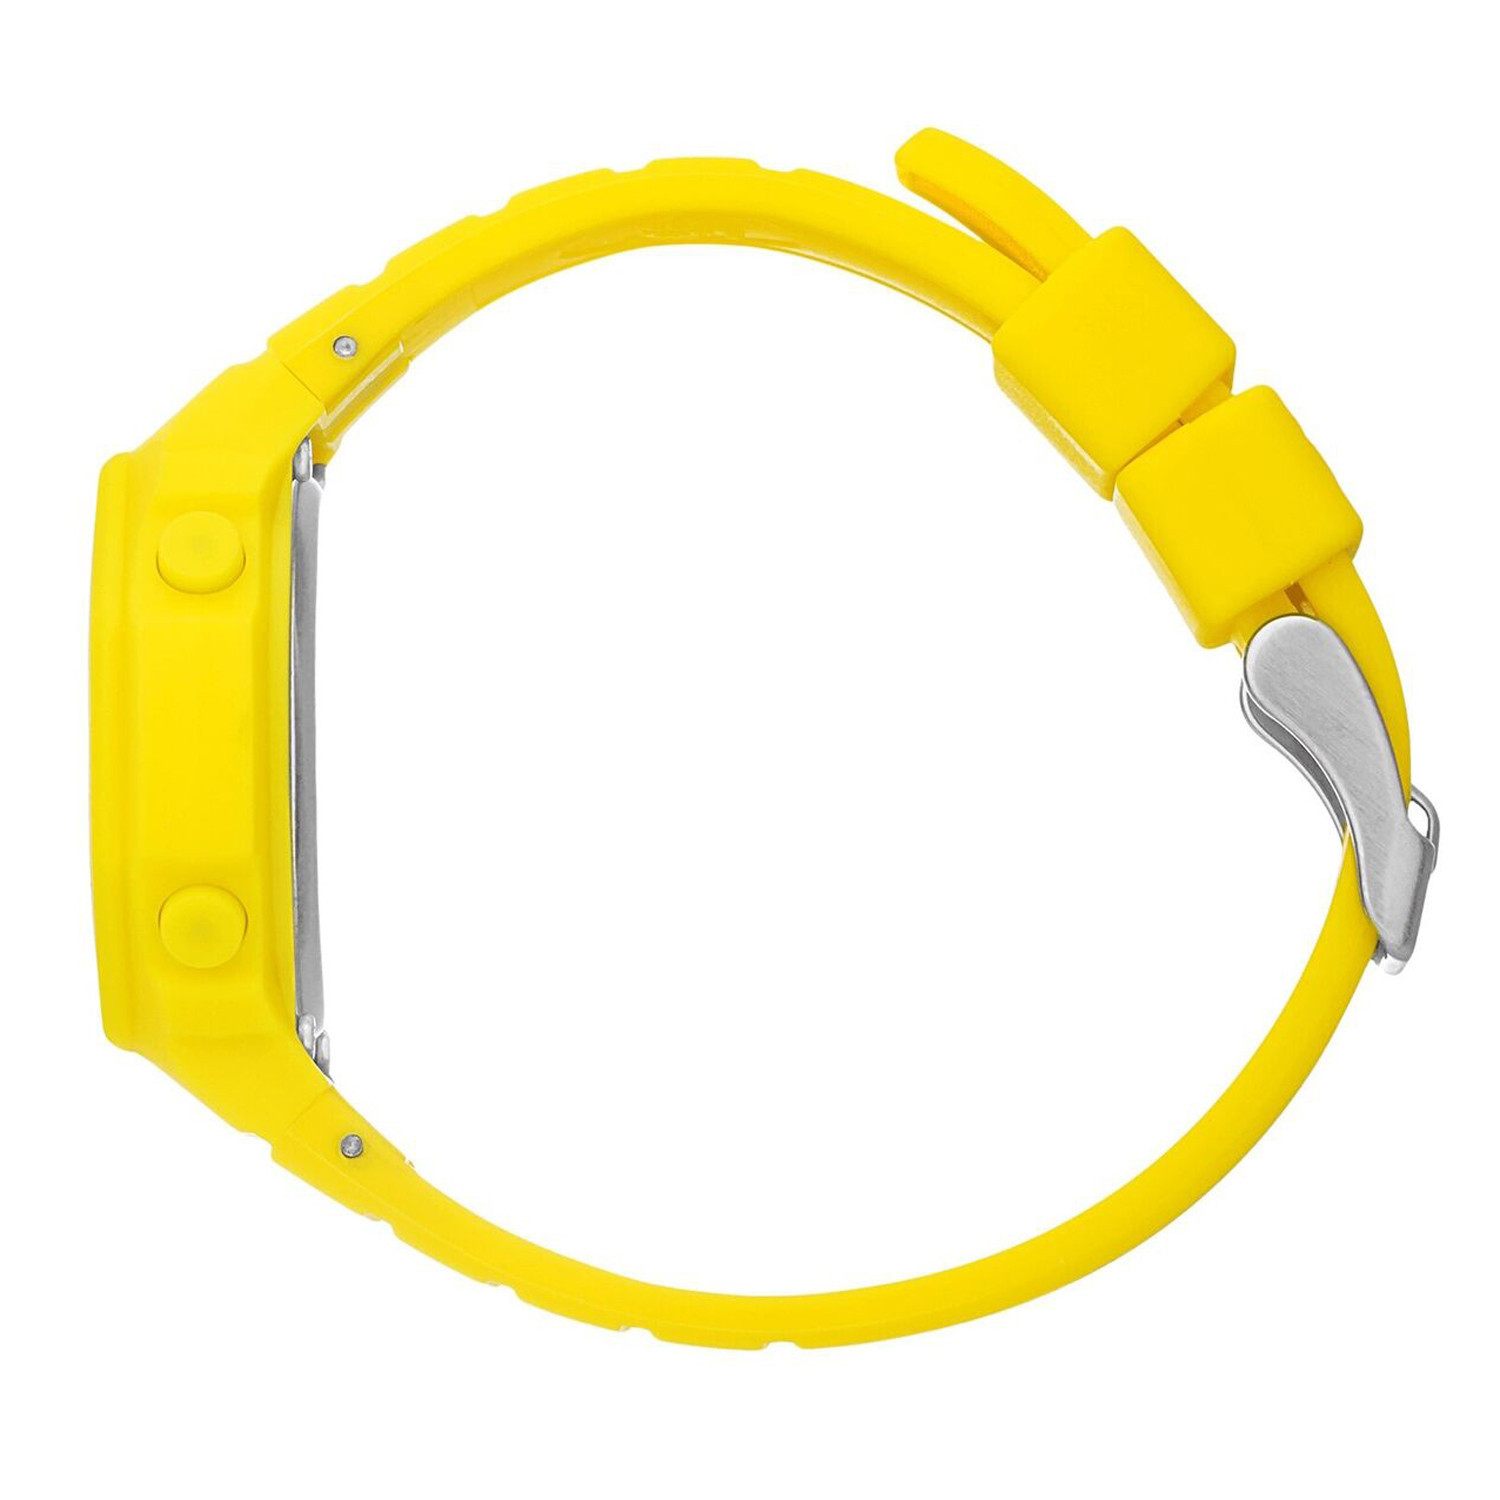 Montre enfant ICE digit ultra
- Yellow - Small